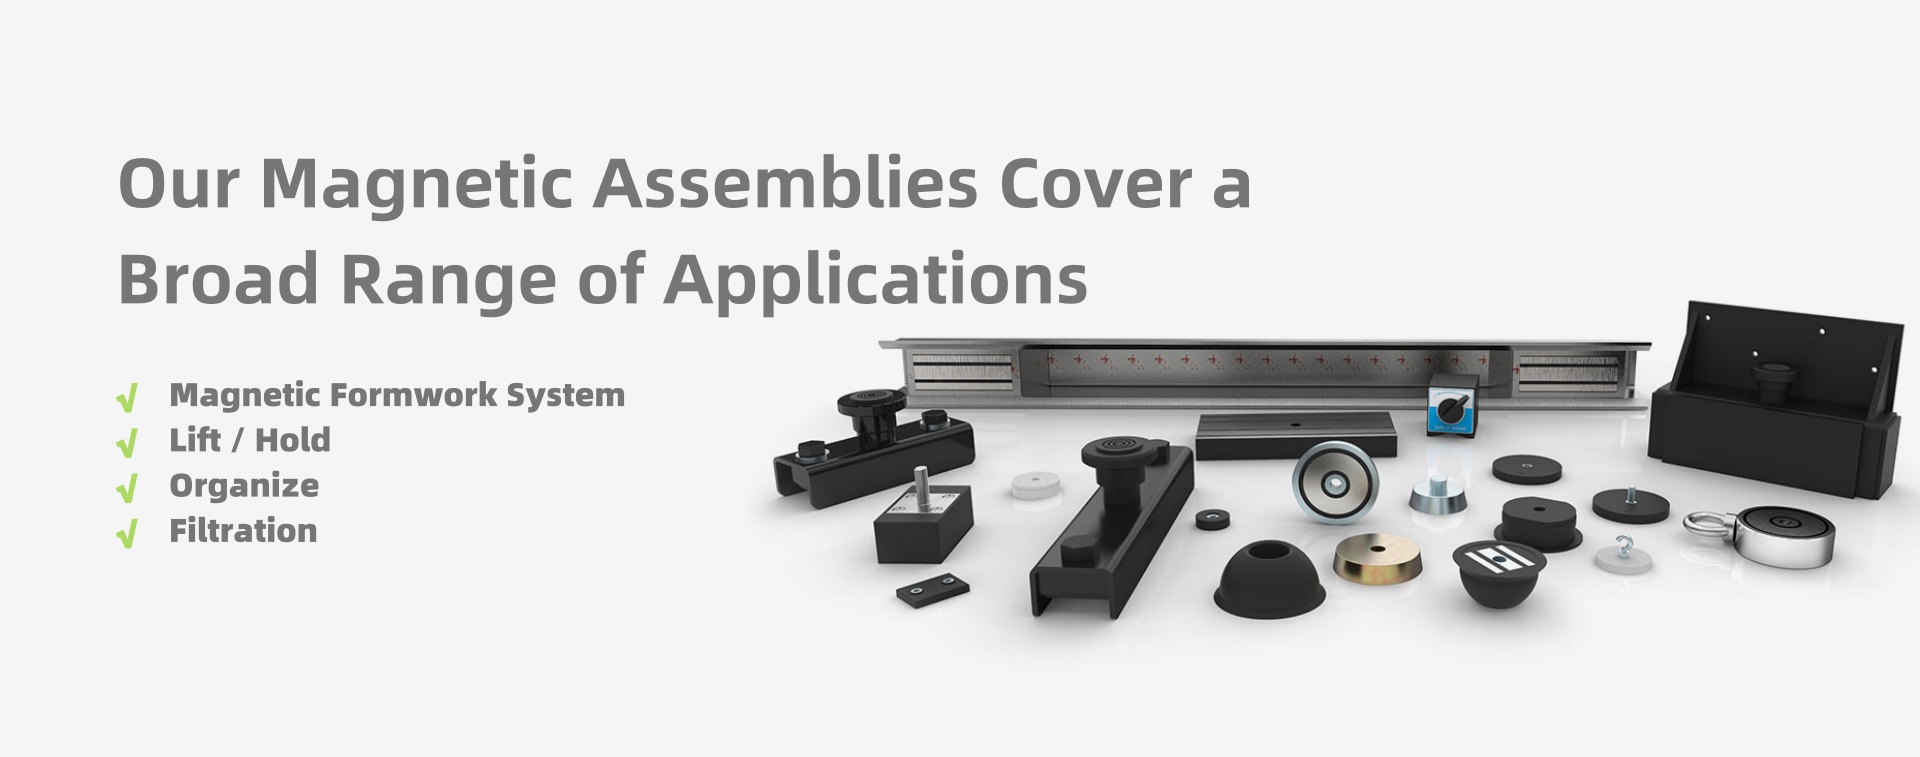 Our Magnetic Assemblies Cover a Broad Range of Applications